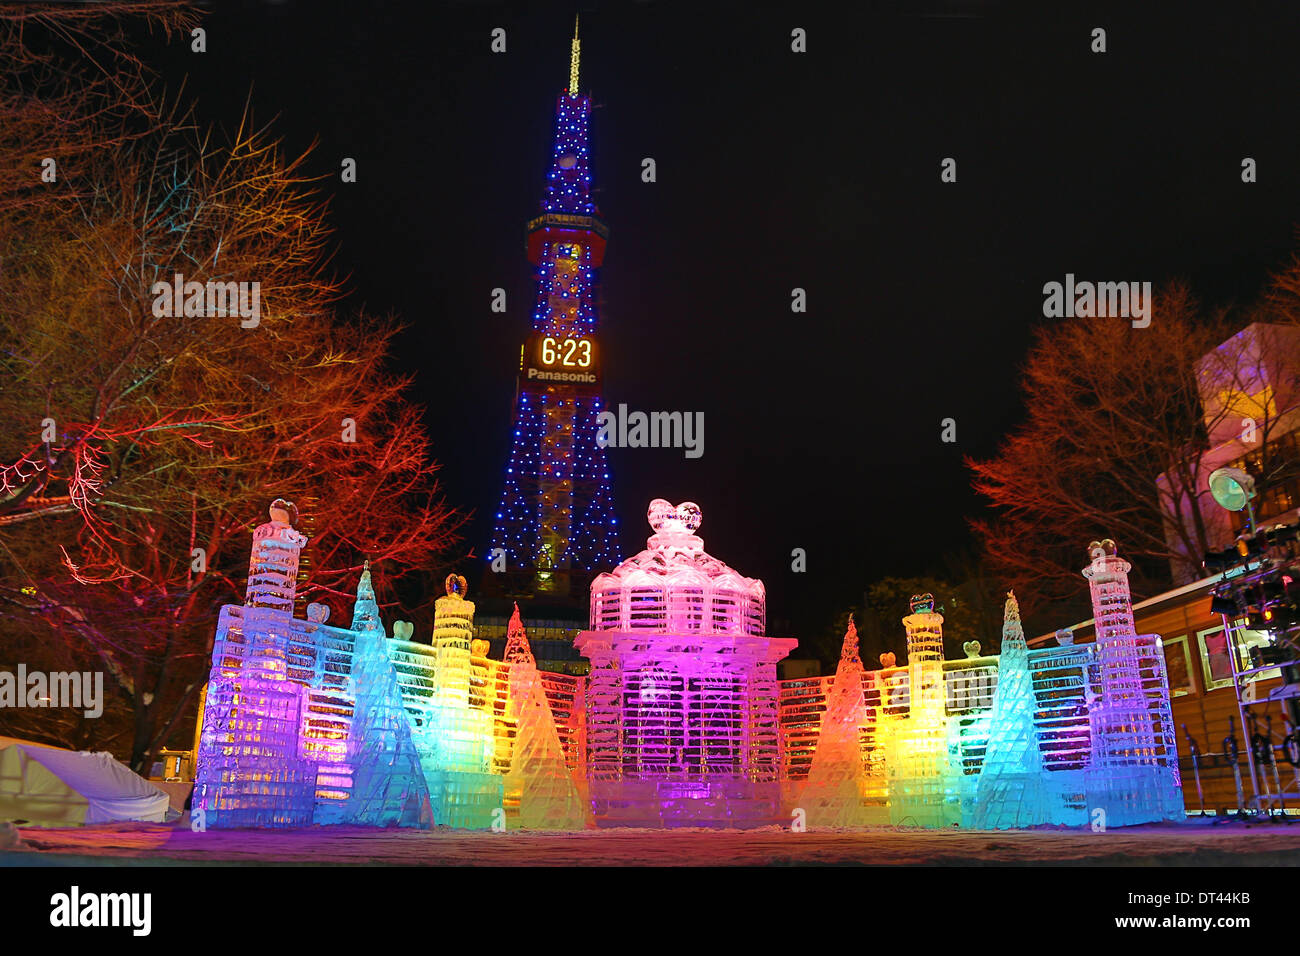 Sapporo, Japan. 8th February 2014. Ice sculpture called The Palace of Heart, which features ice statues of fairies that are making and carrying hearts, symbolising feelings - Ice Sculptures went on display and were illuminated ahead of the opening of the 65th Sapporo Snow Festival 2014 in Sapporo, Japan. The festival opens on the 5th February and runs until the 11th and is attended by over two million people! Also in shot is the Sapporo Tower. Credit:  Paul Brown/Alamy Live News Stock Photo